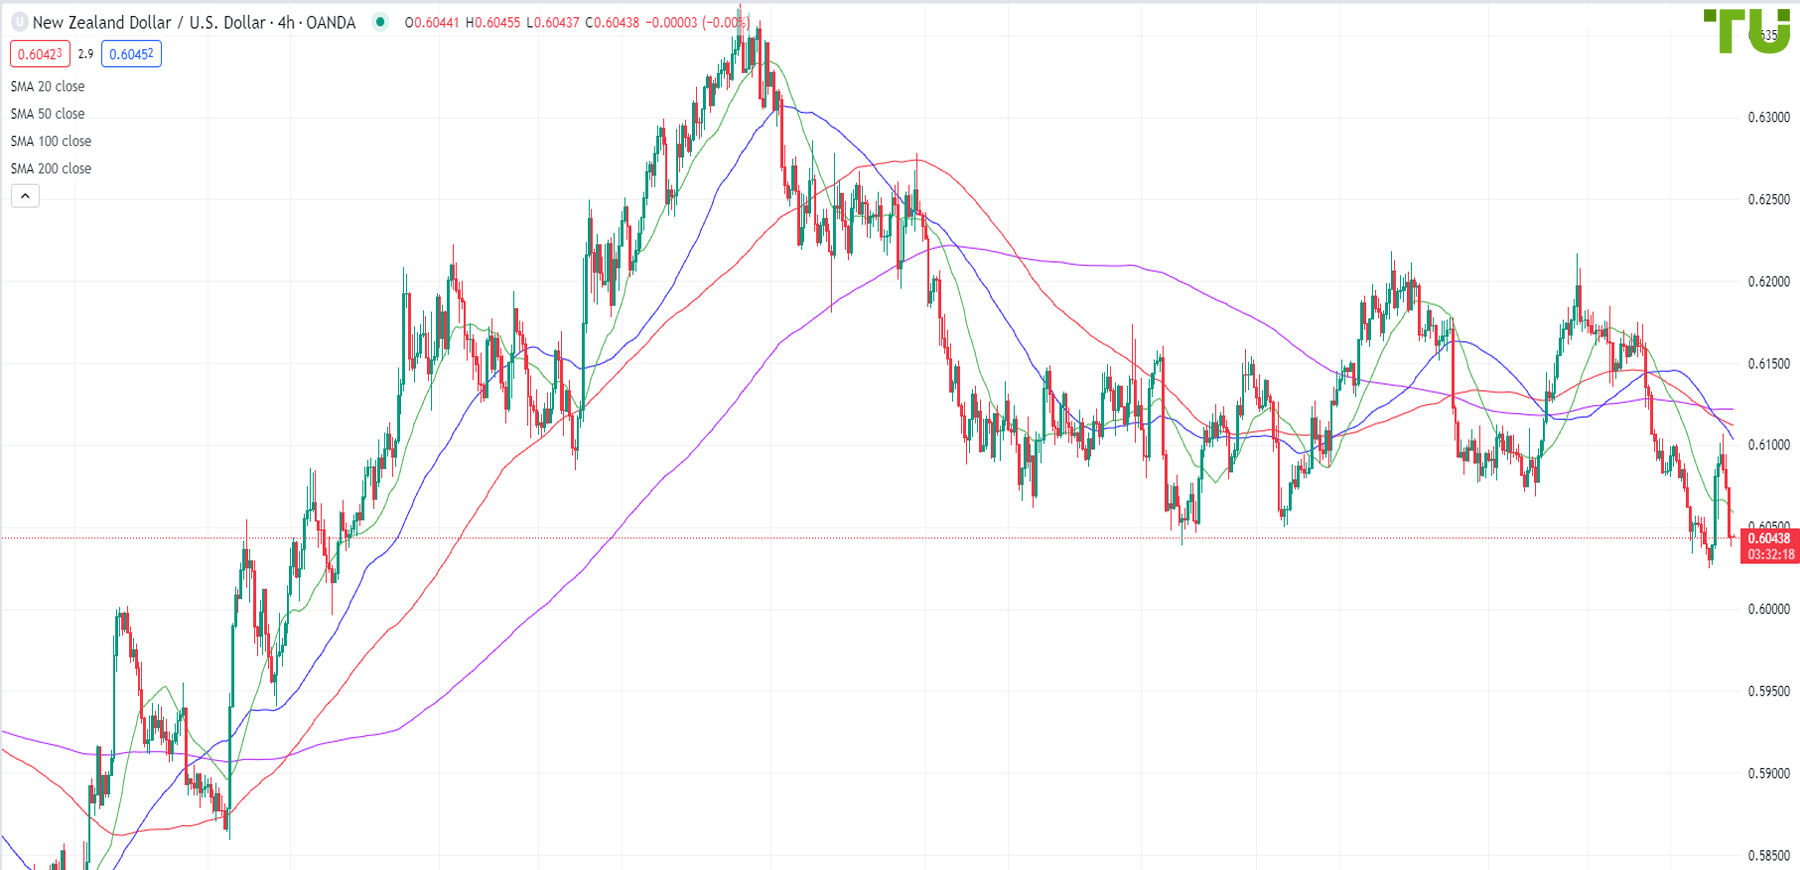 The kiwi/dollar returned to support at 0.6040